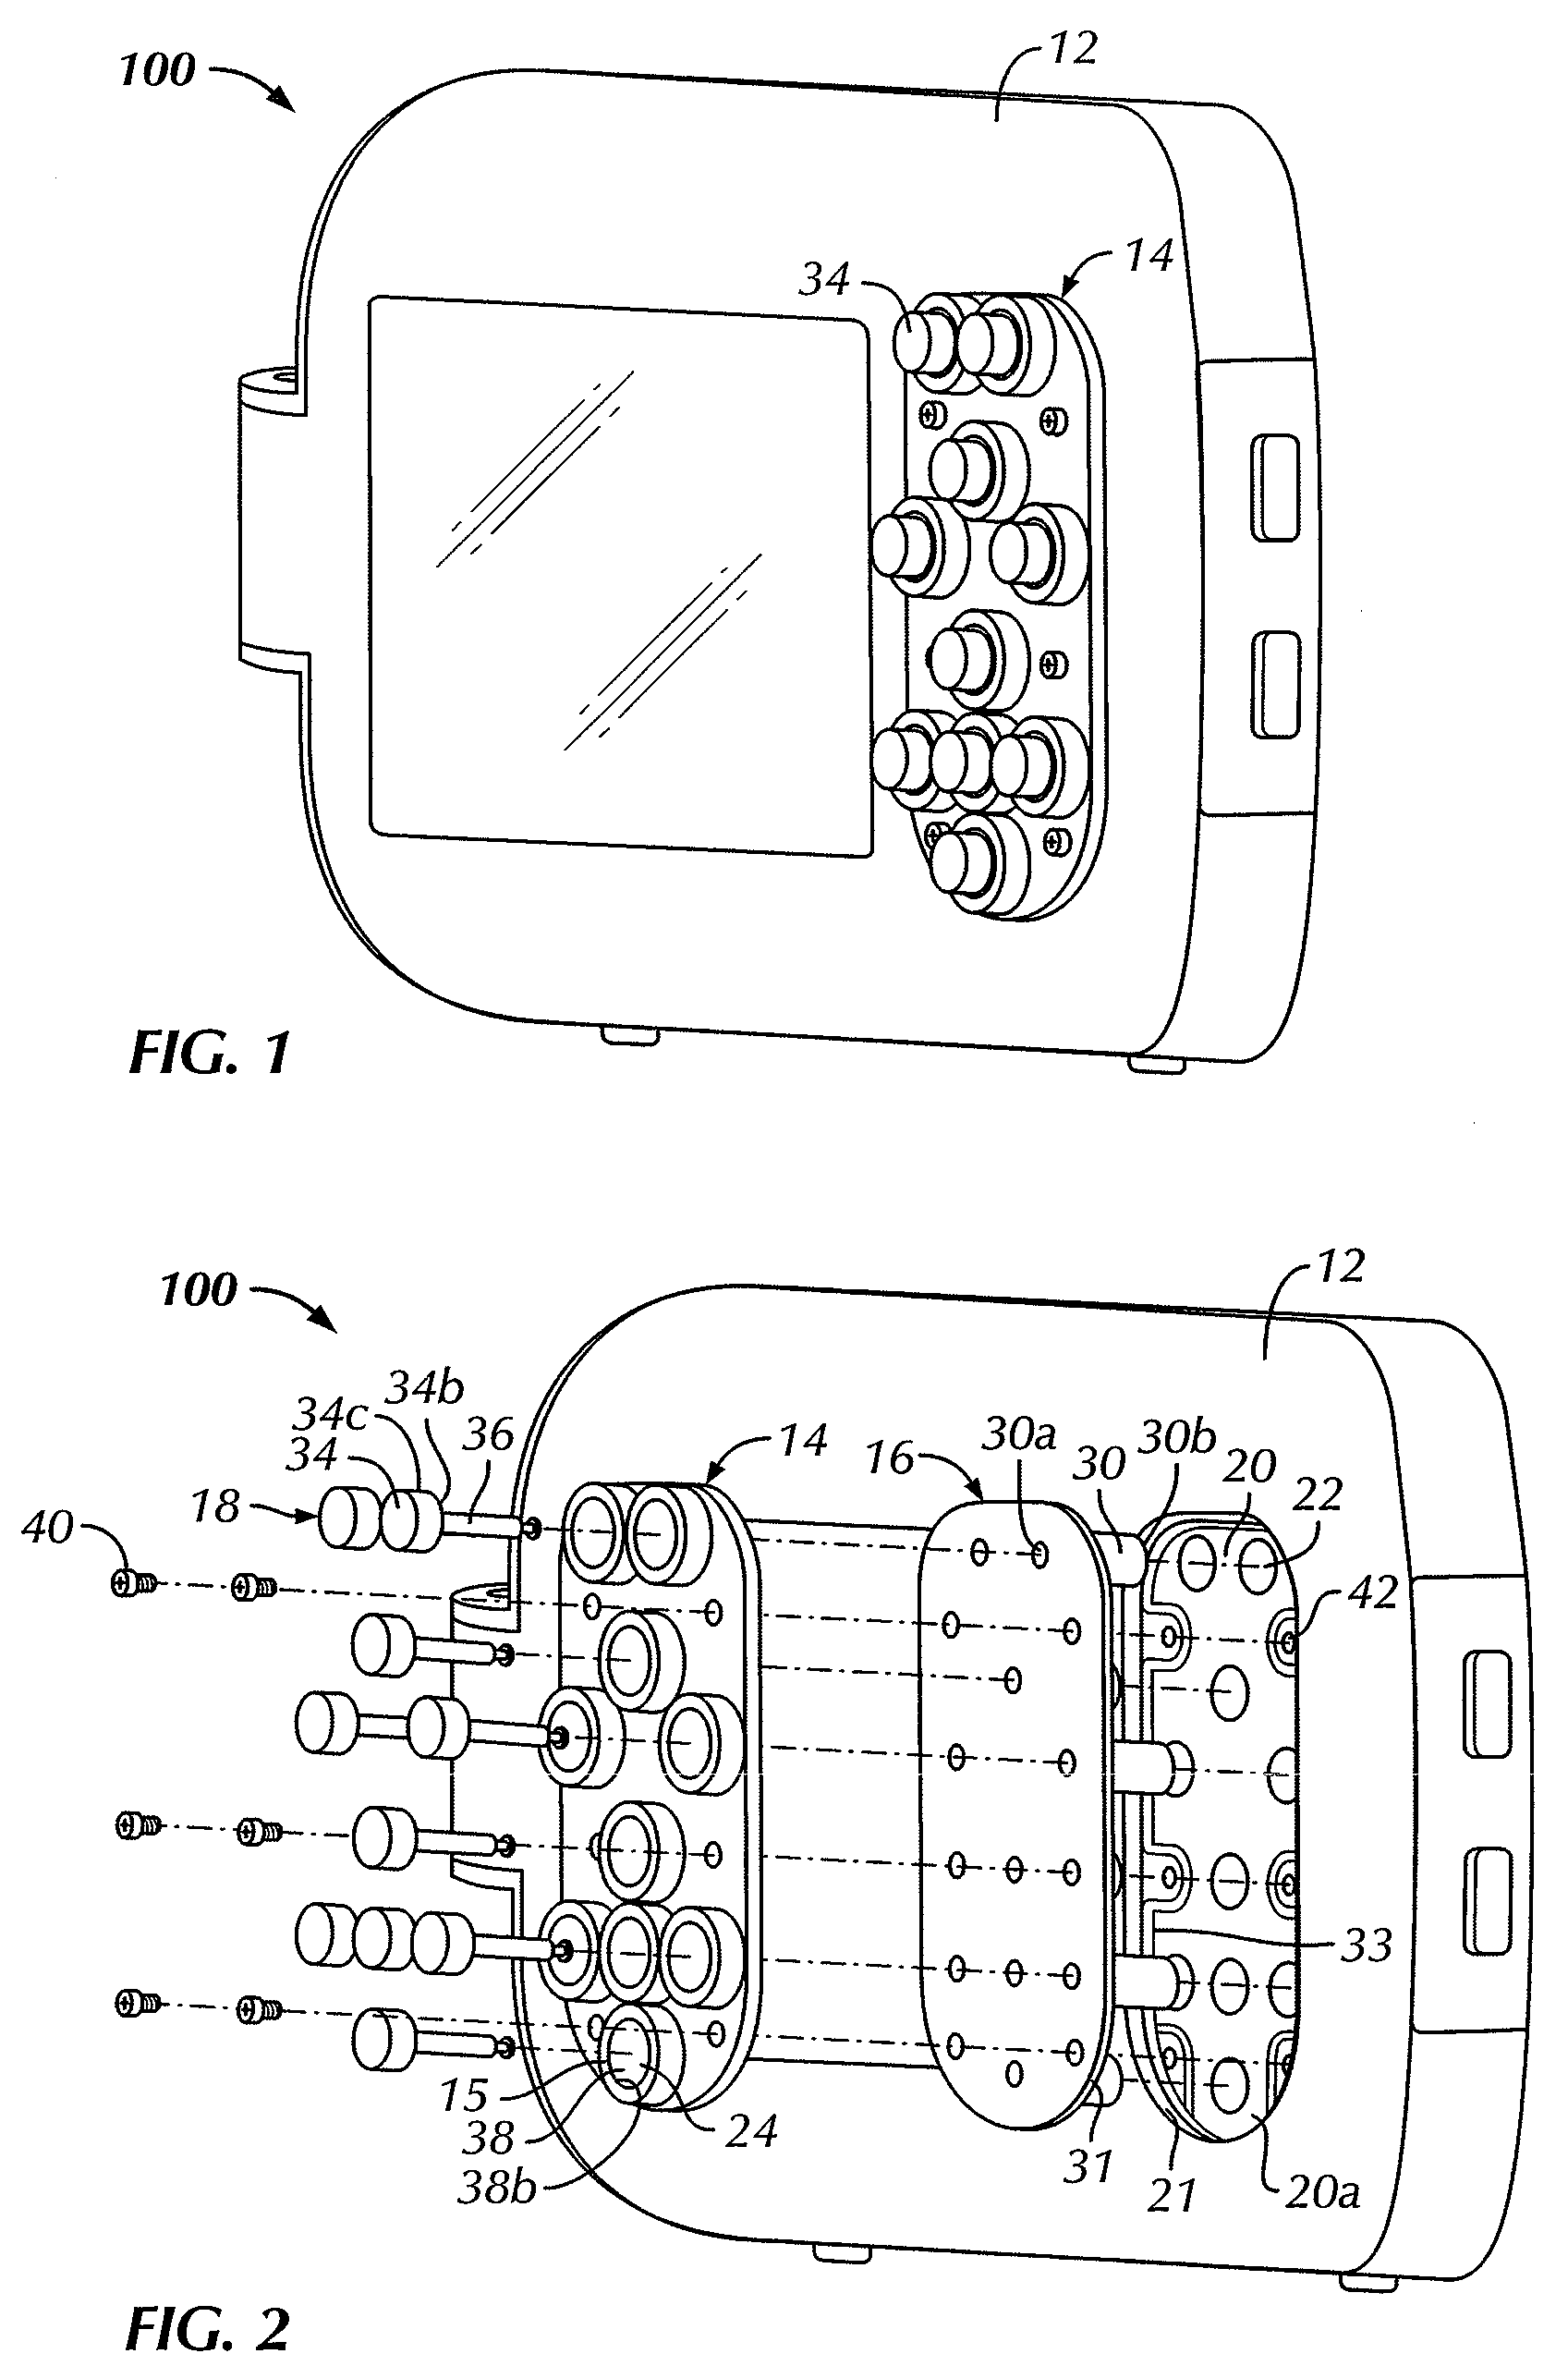 Waterproof operating device with one or more capacitive switches